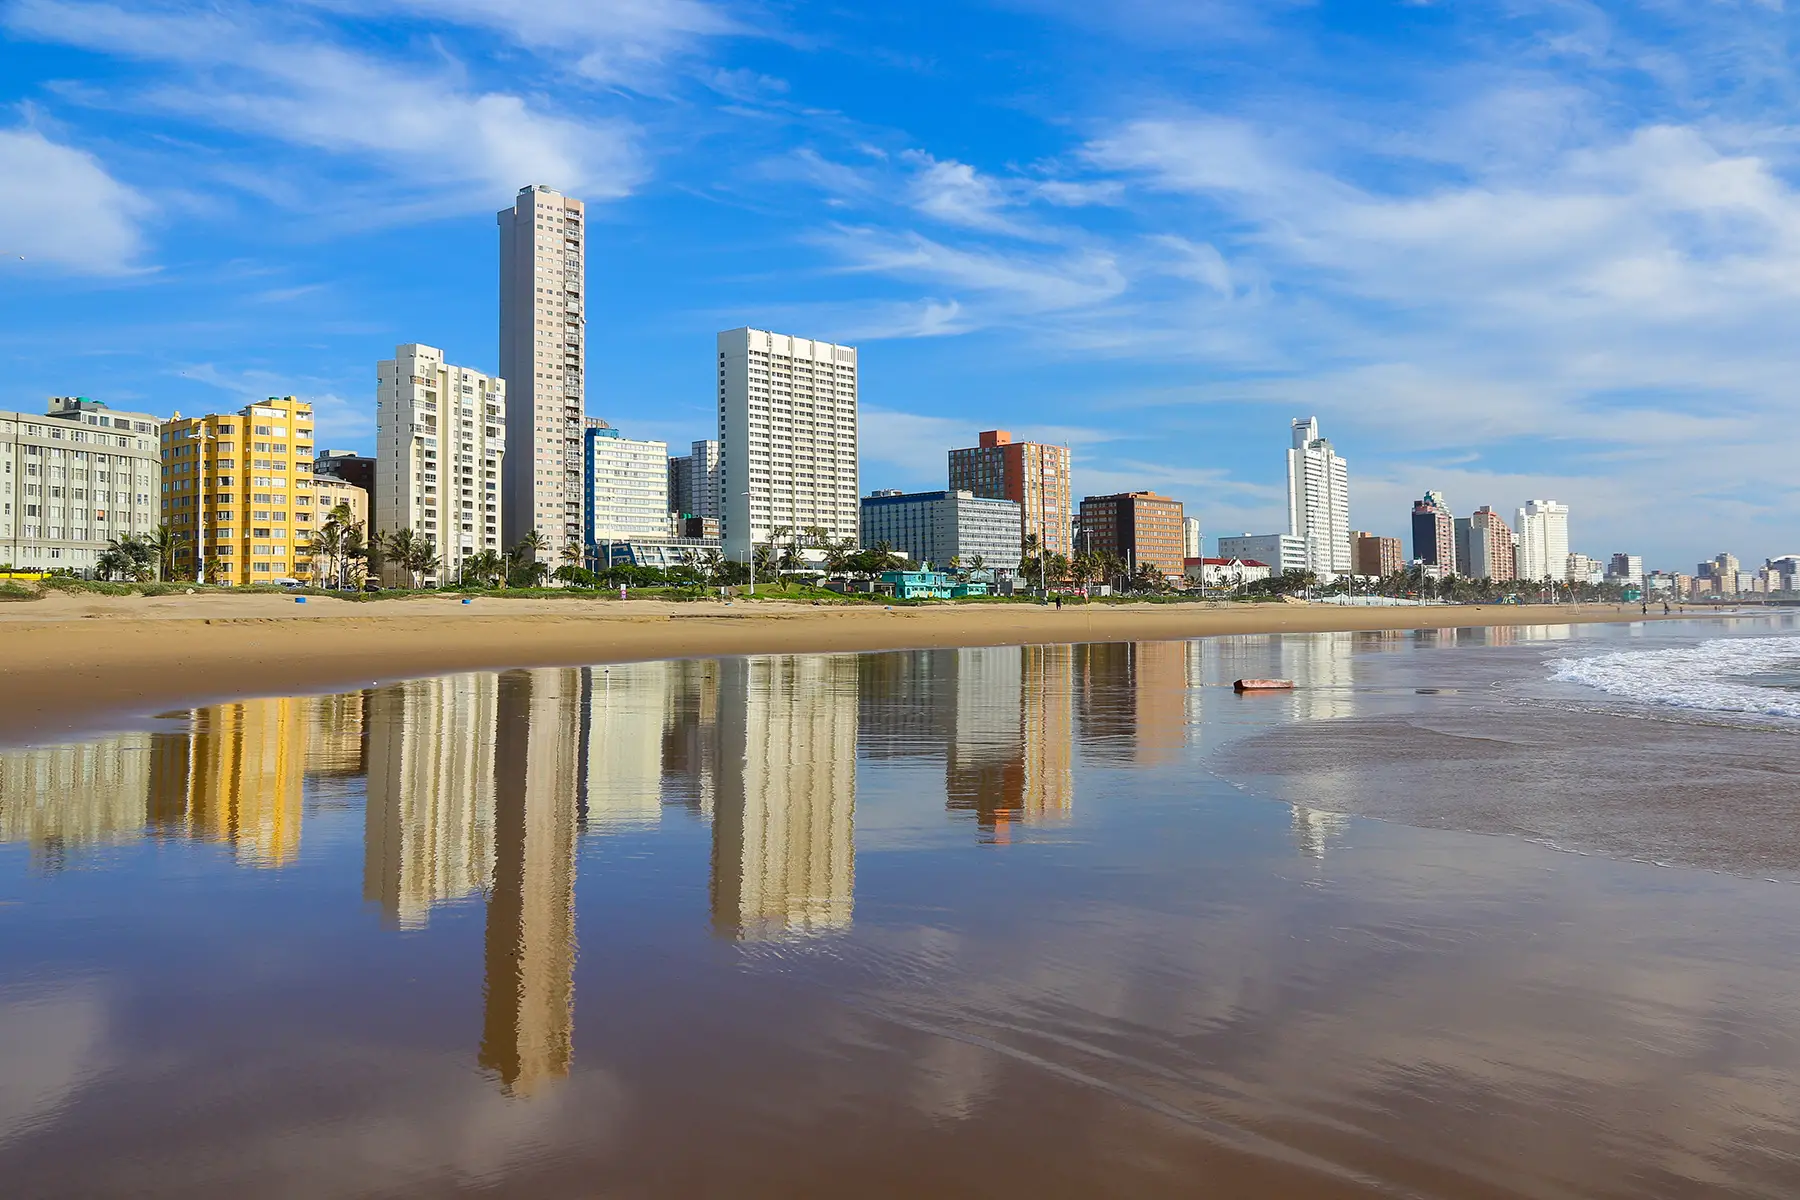 Durban cityscape with reflection